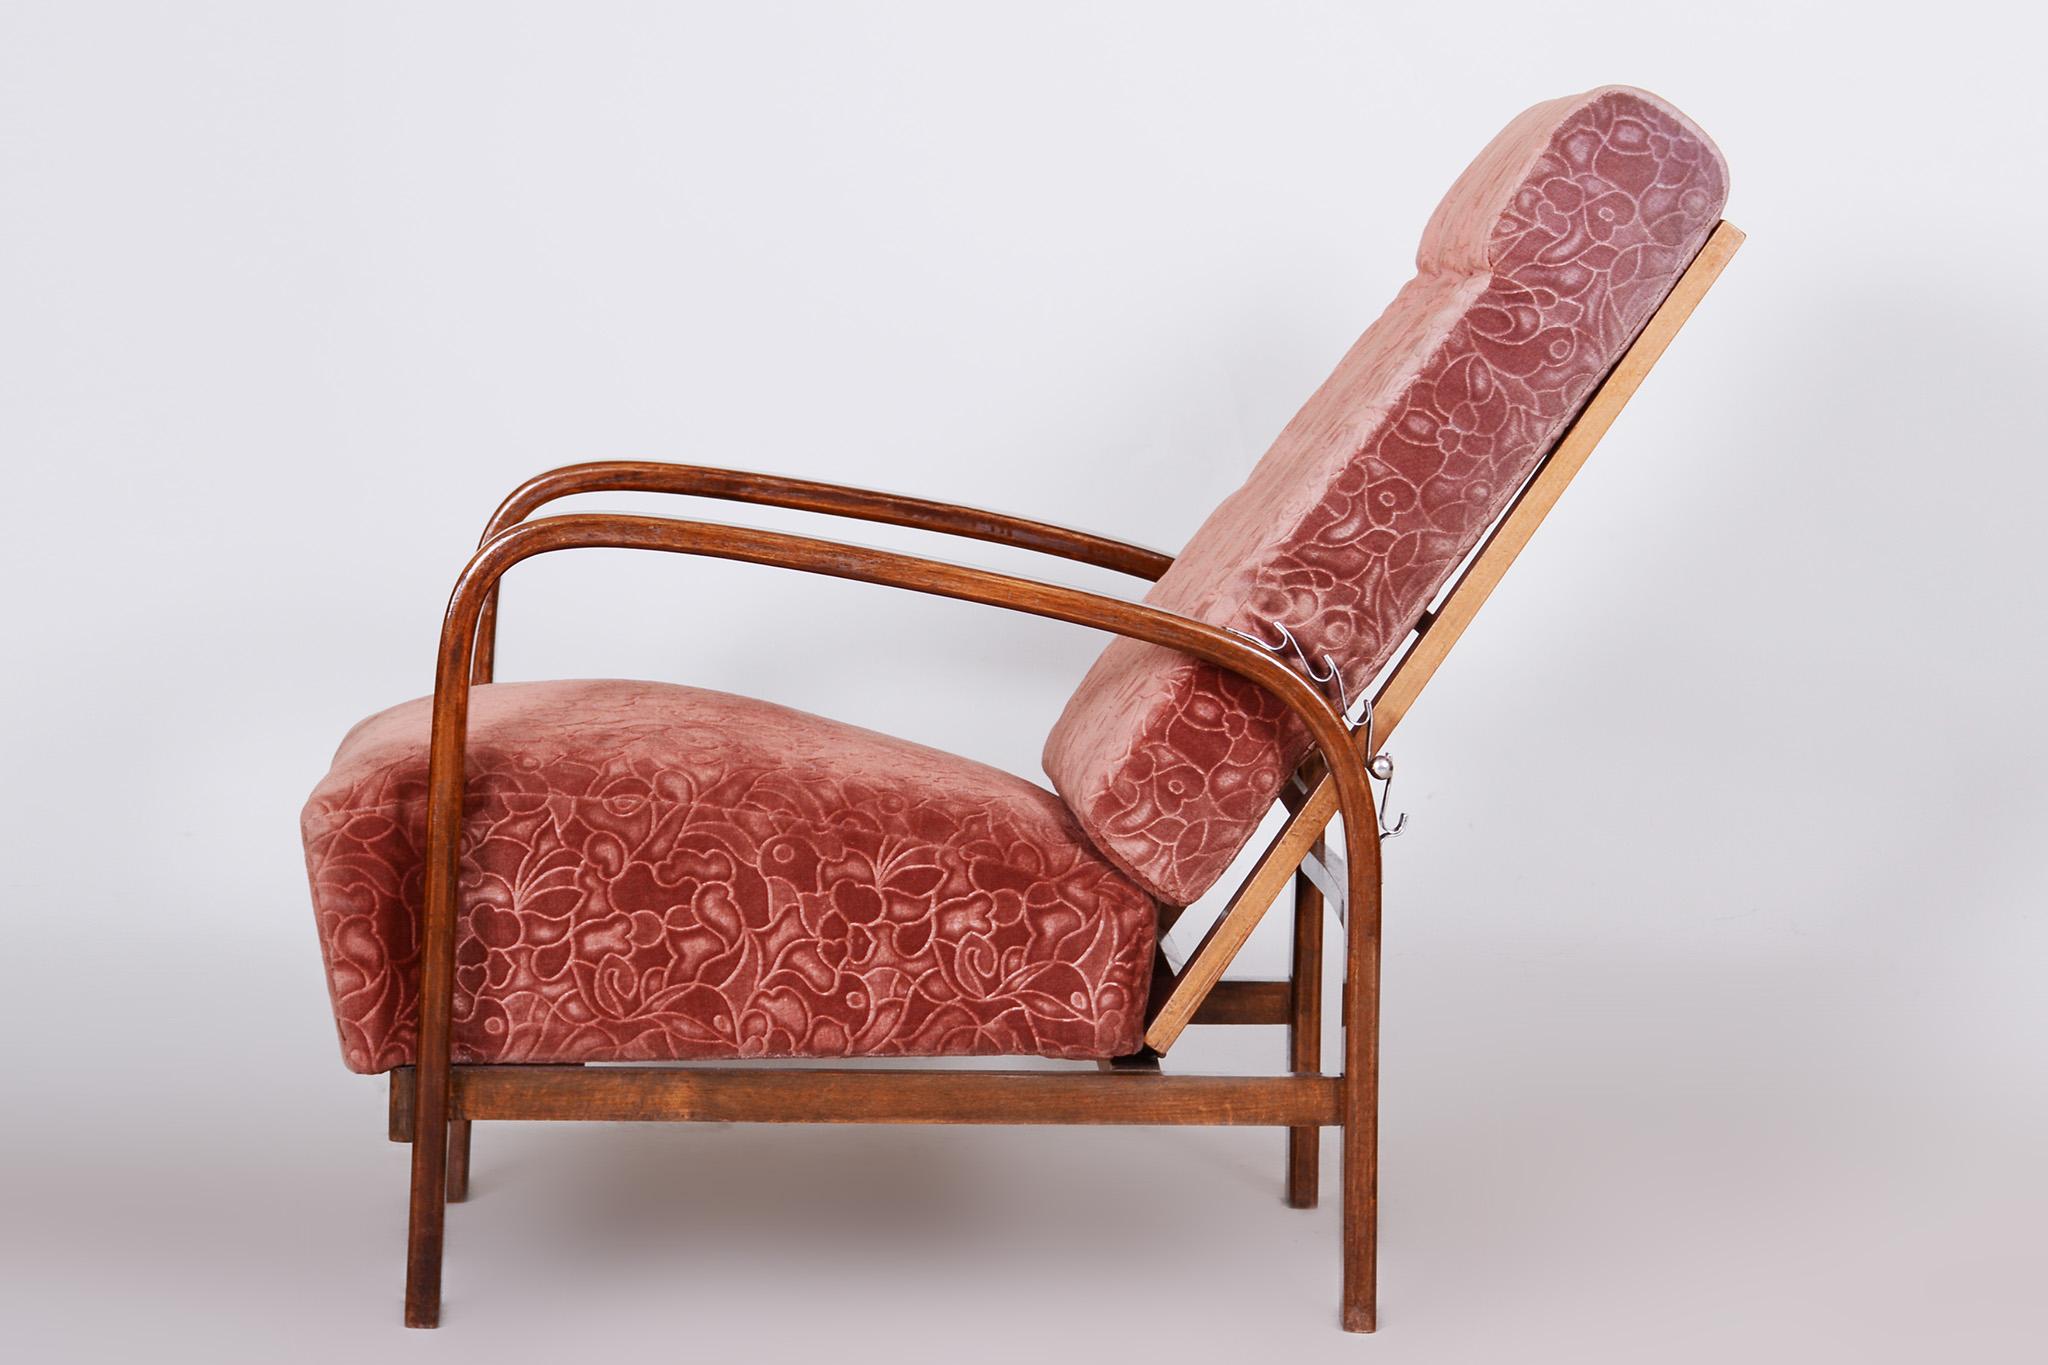 Mid-20th Century Restored Art Deco Positioning Armchair, Beech Solid Wood, Walnut, 1930s, Czechia For Sale